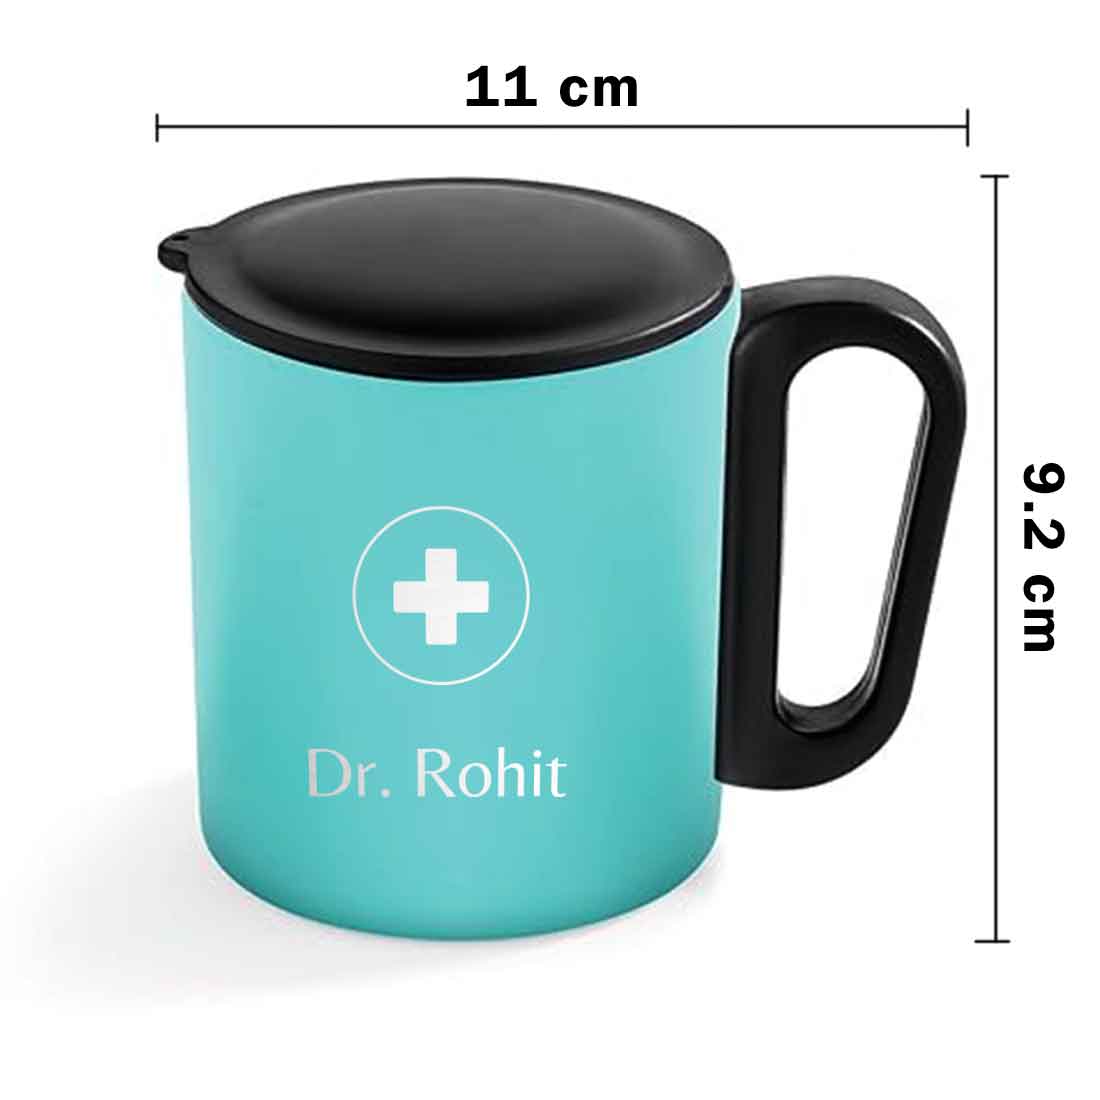 Stainless Steel Vacuum Mug for DR- Insulated Coffee Cup